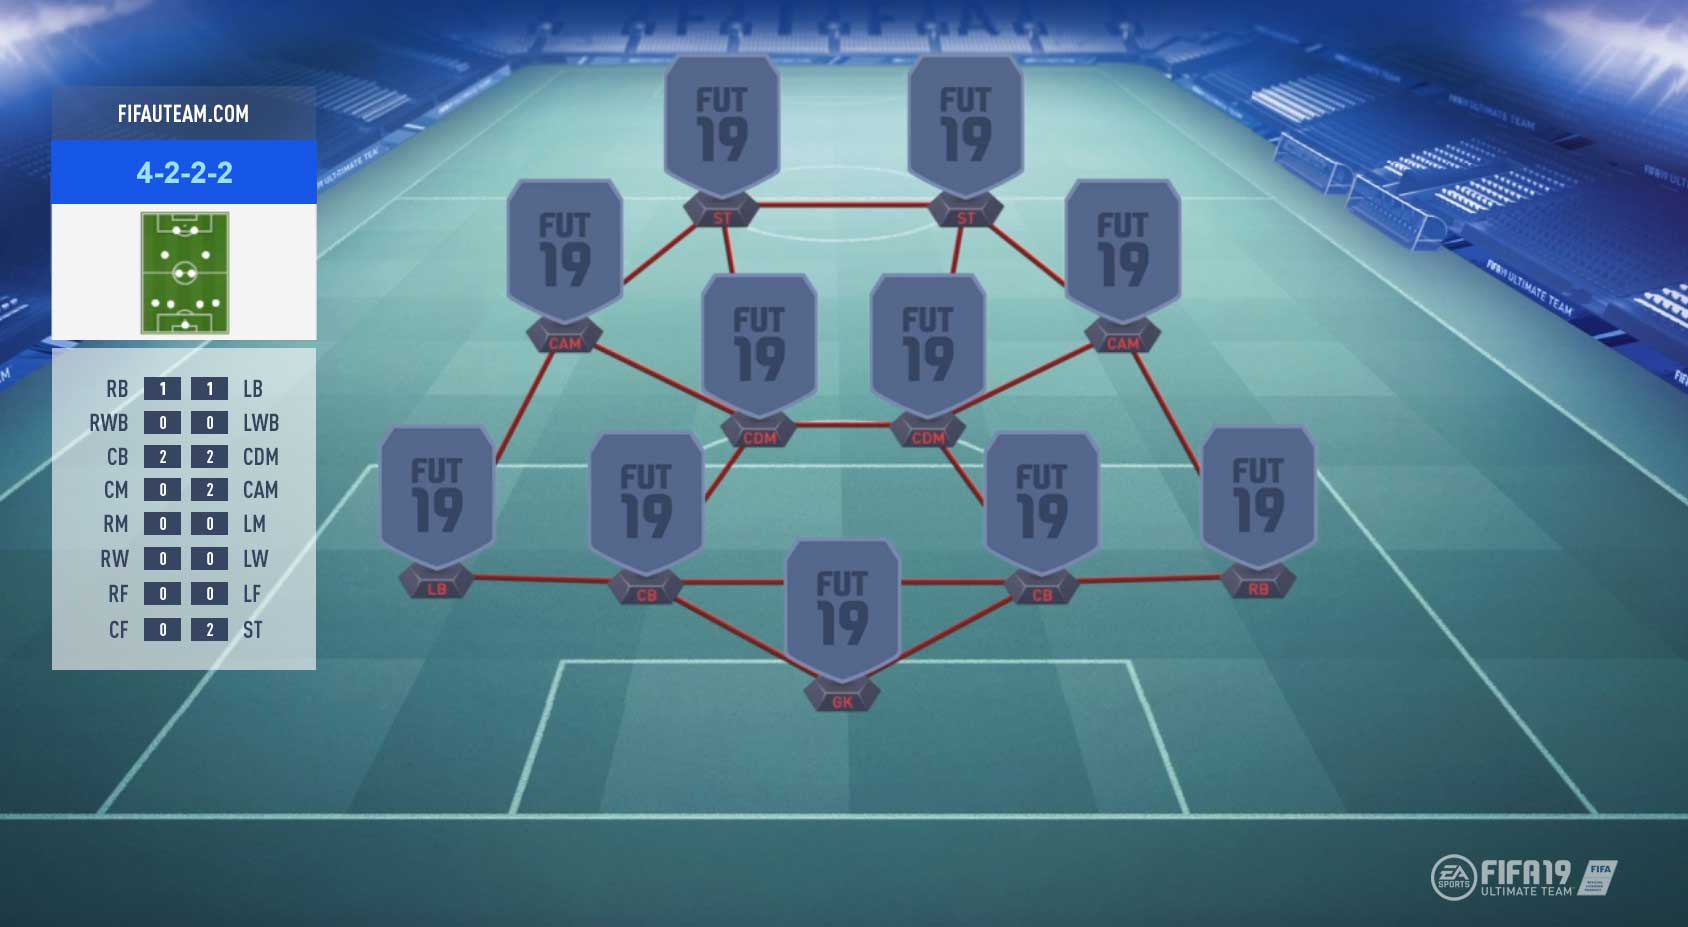 FIFA 19 Formations Guide – 4-2-2-2